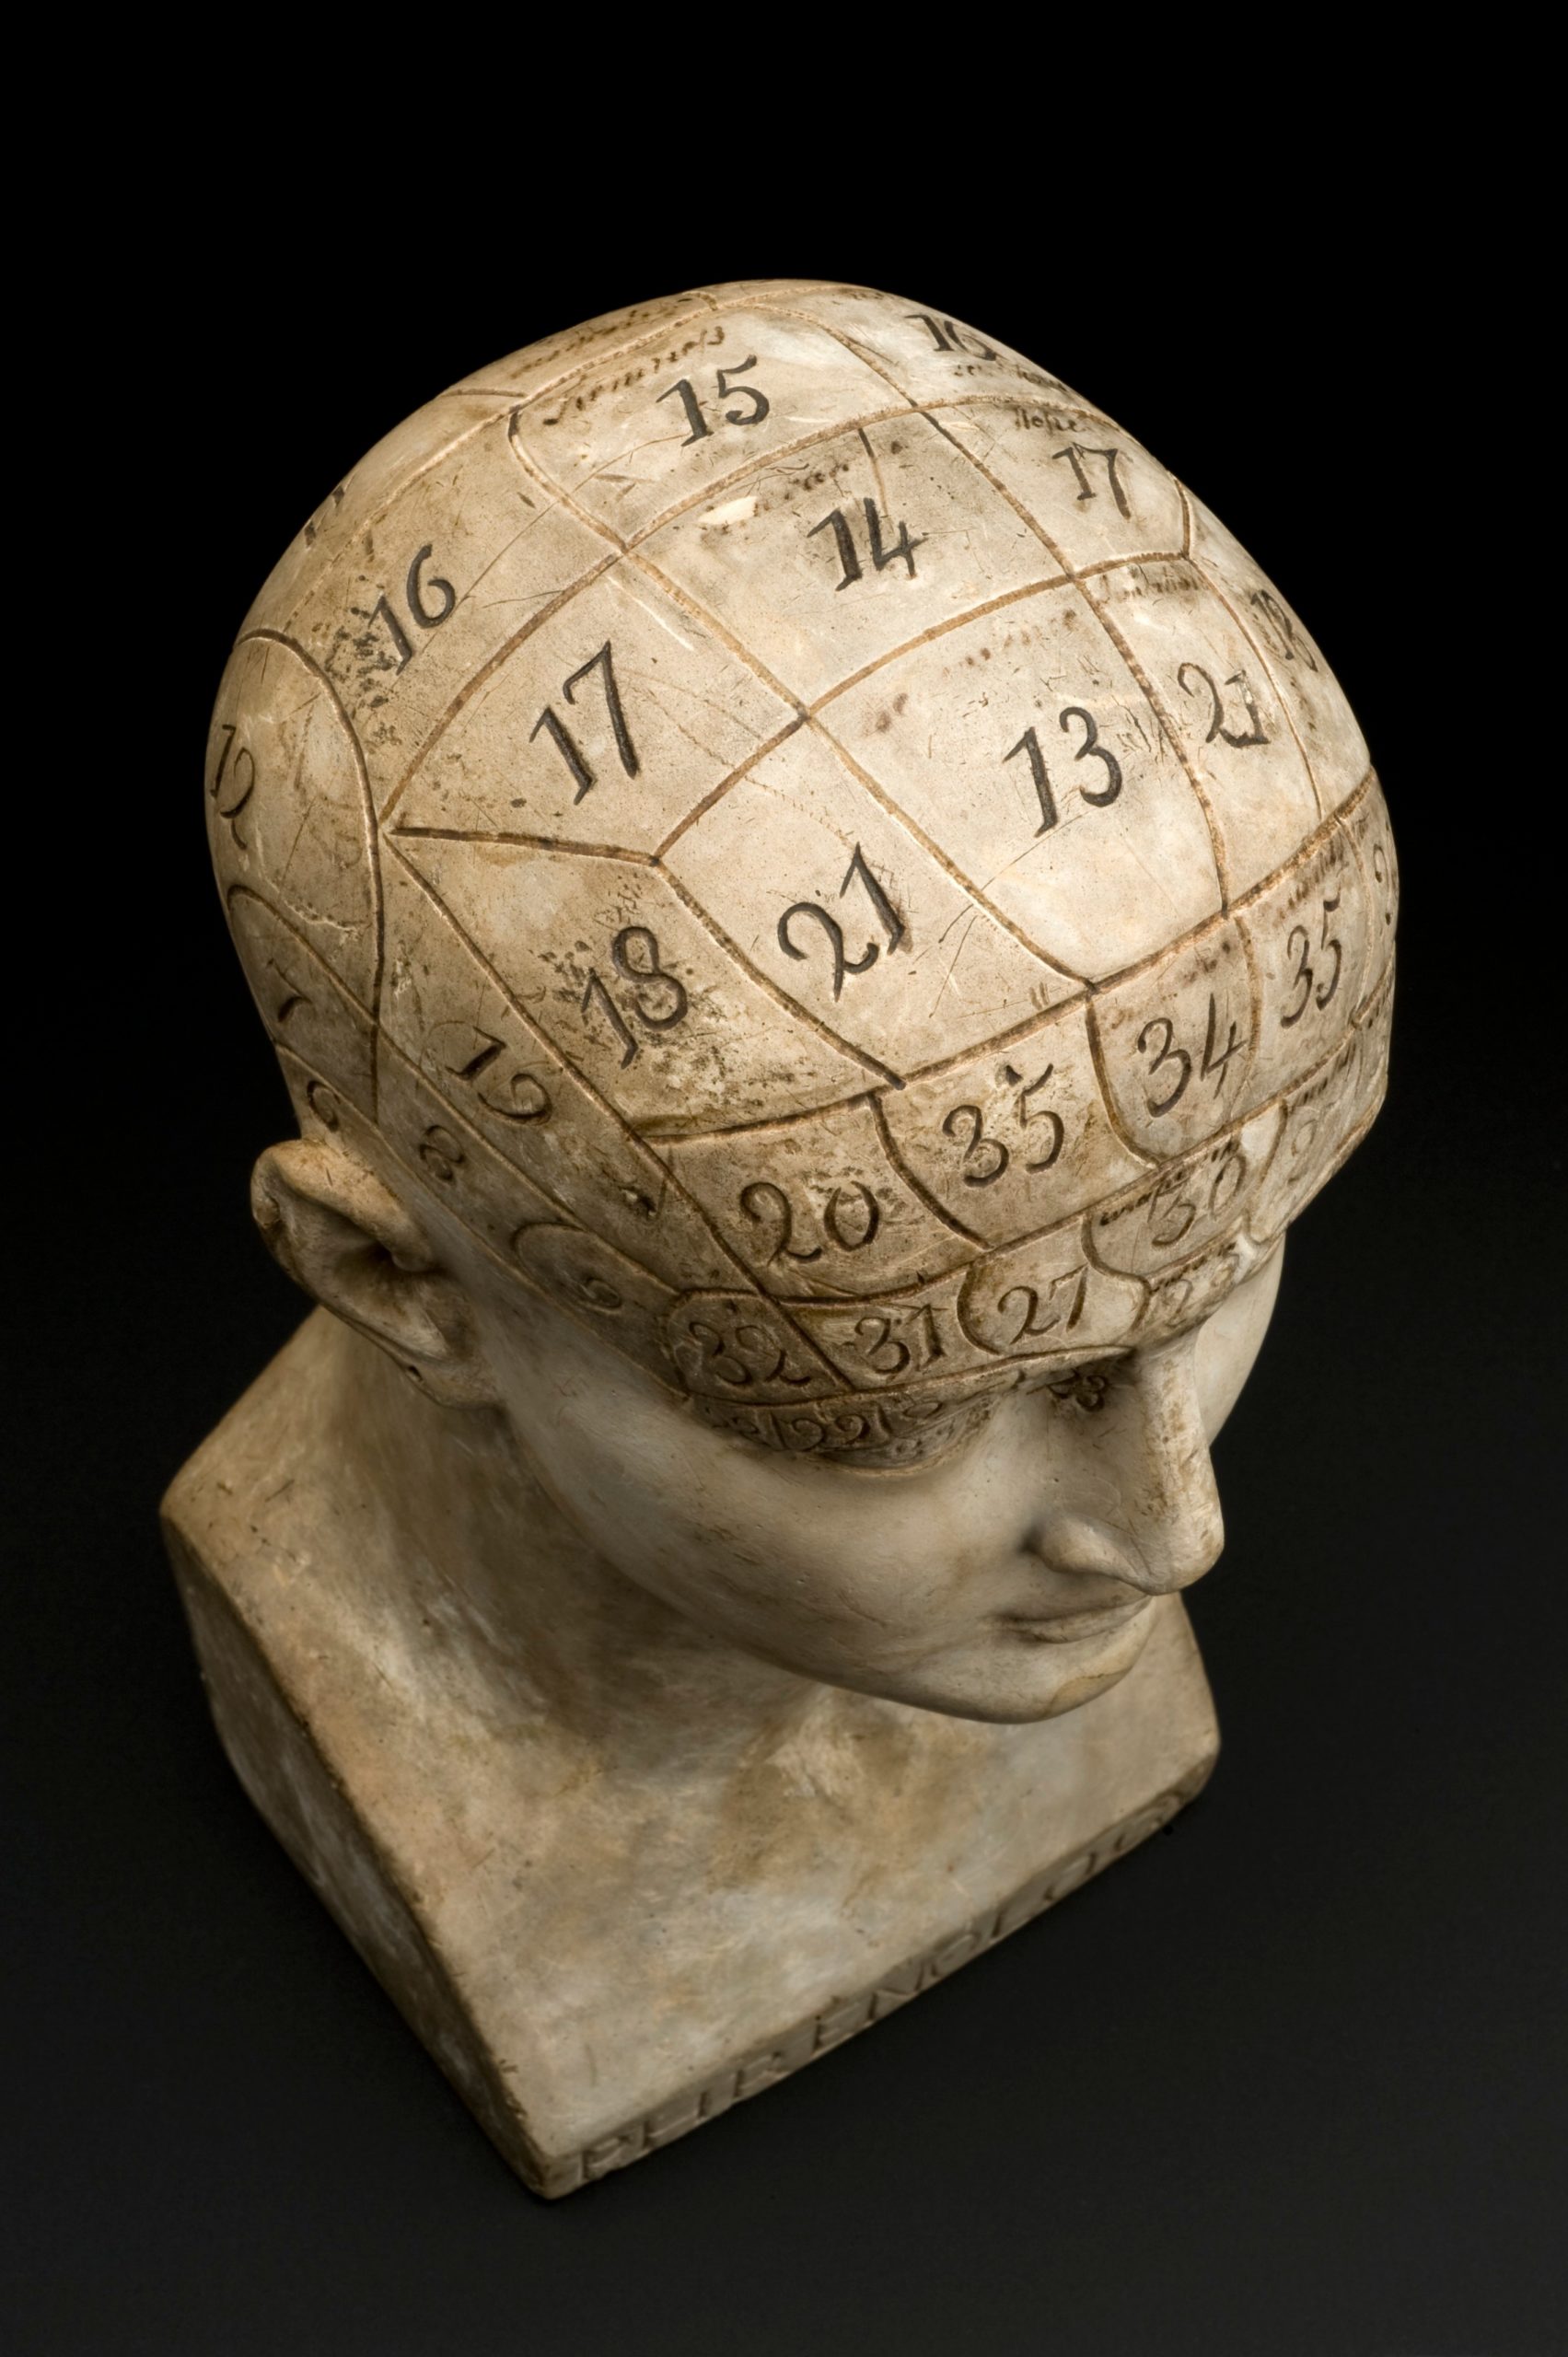 Earthenware phrenological bust, areas are marked off with an impressed line, by J. De Ville, London, 1821